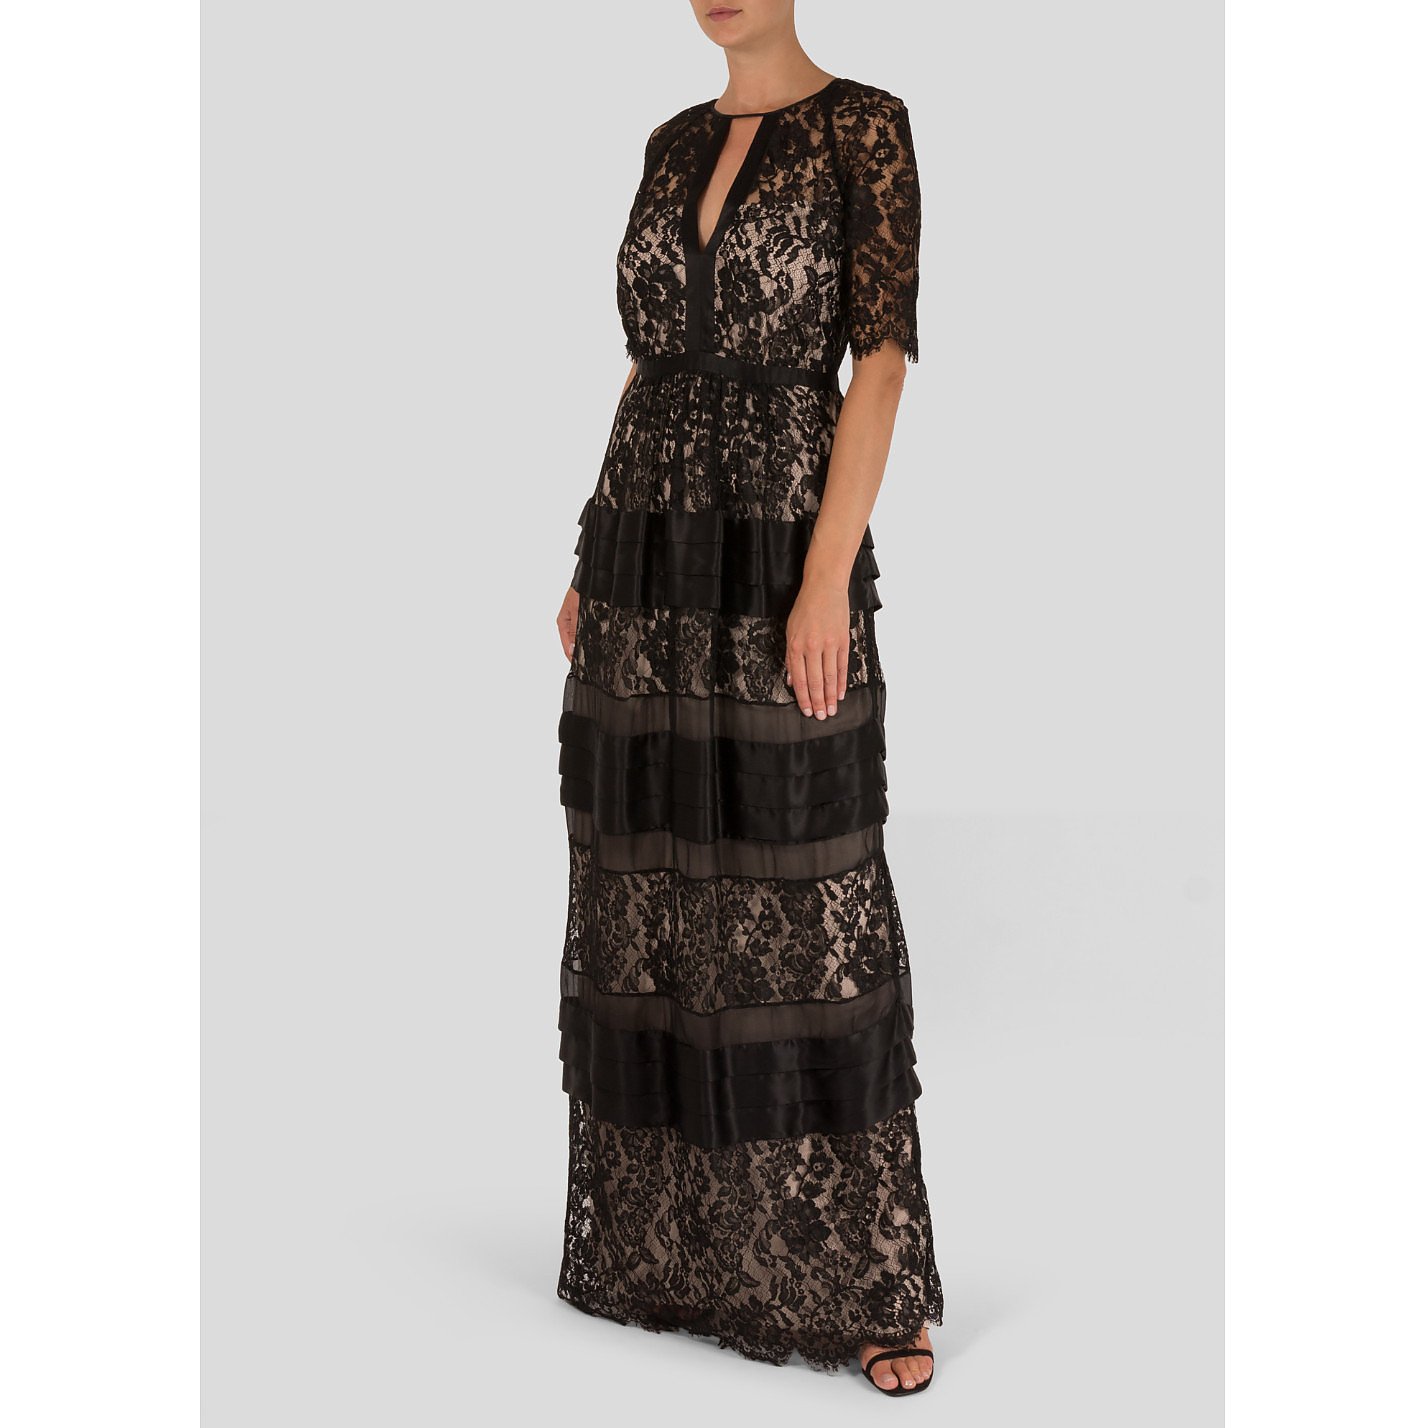 Temperley London Lace and Silk Gown